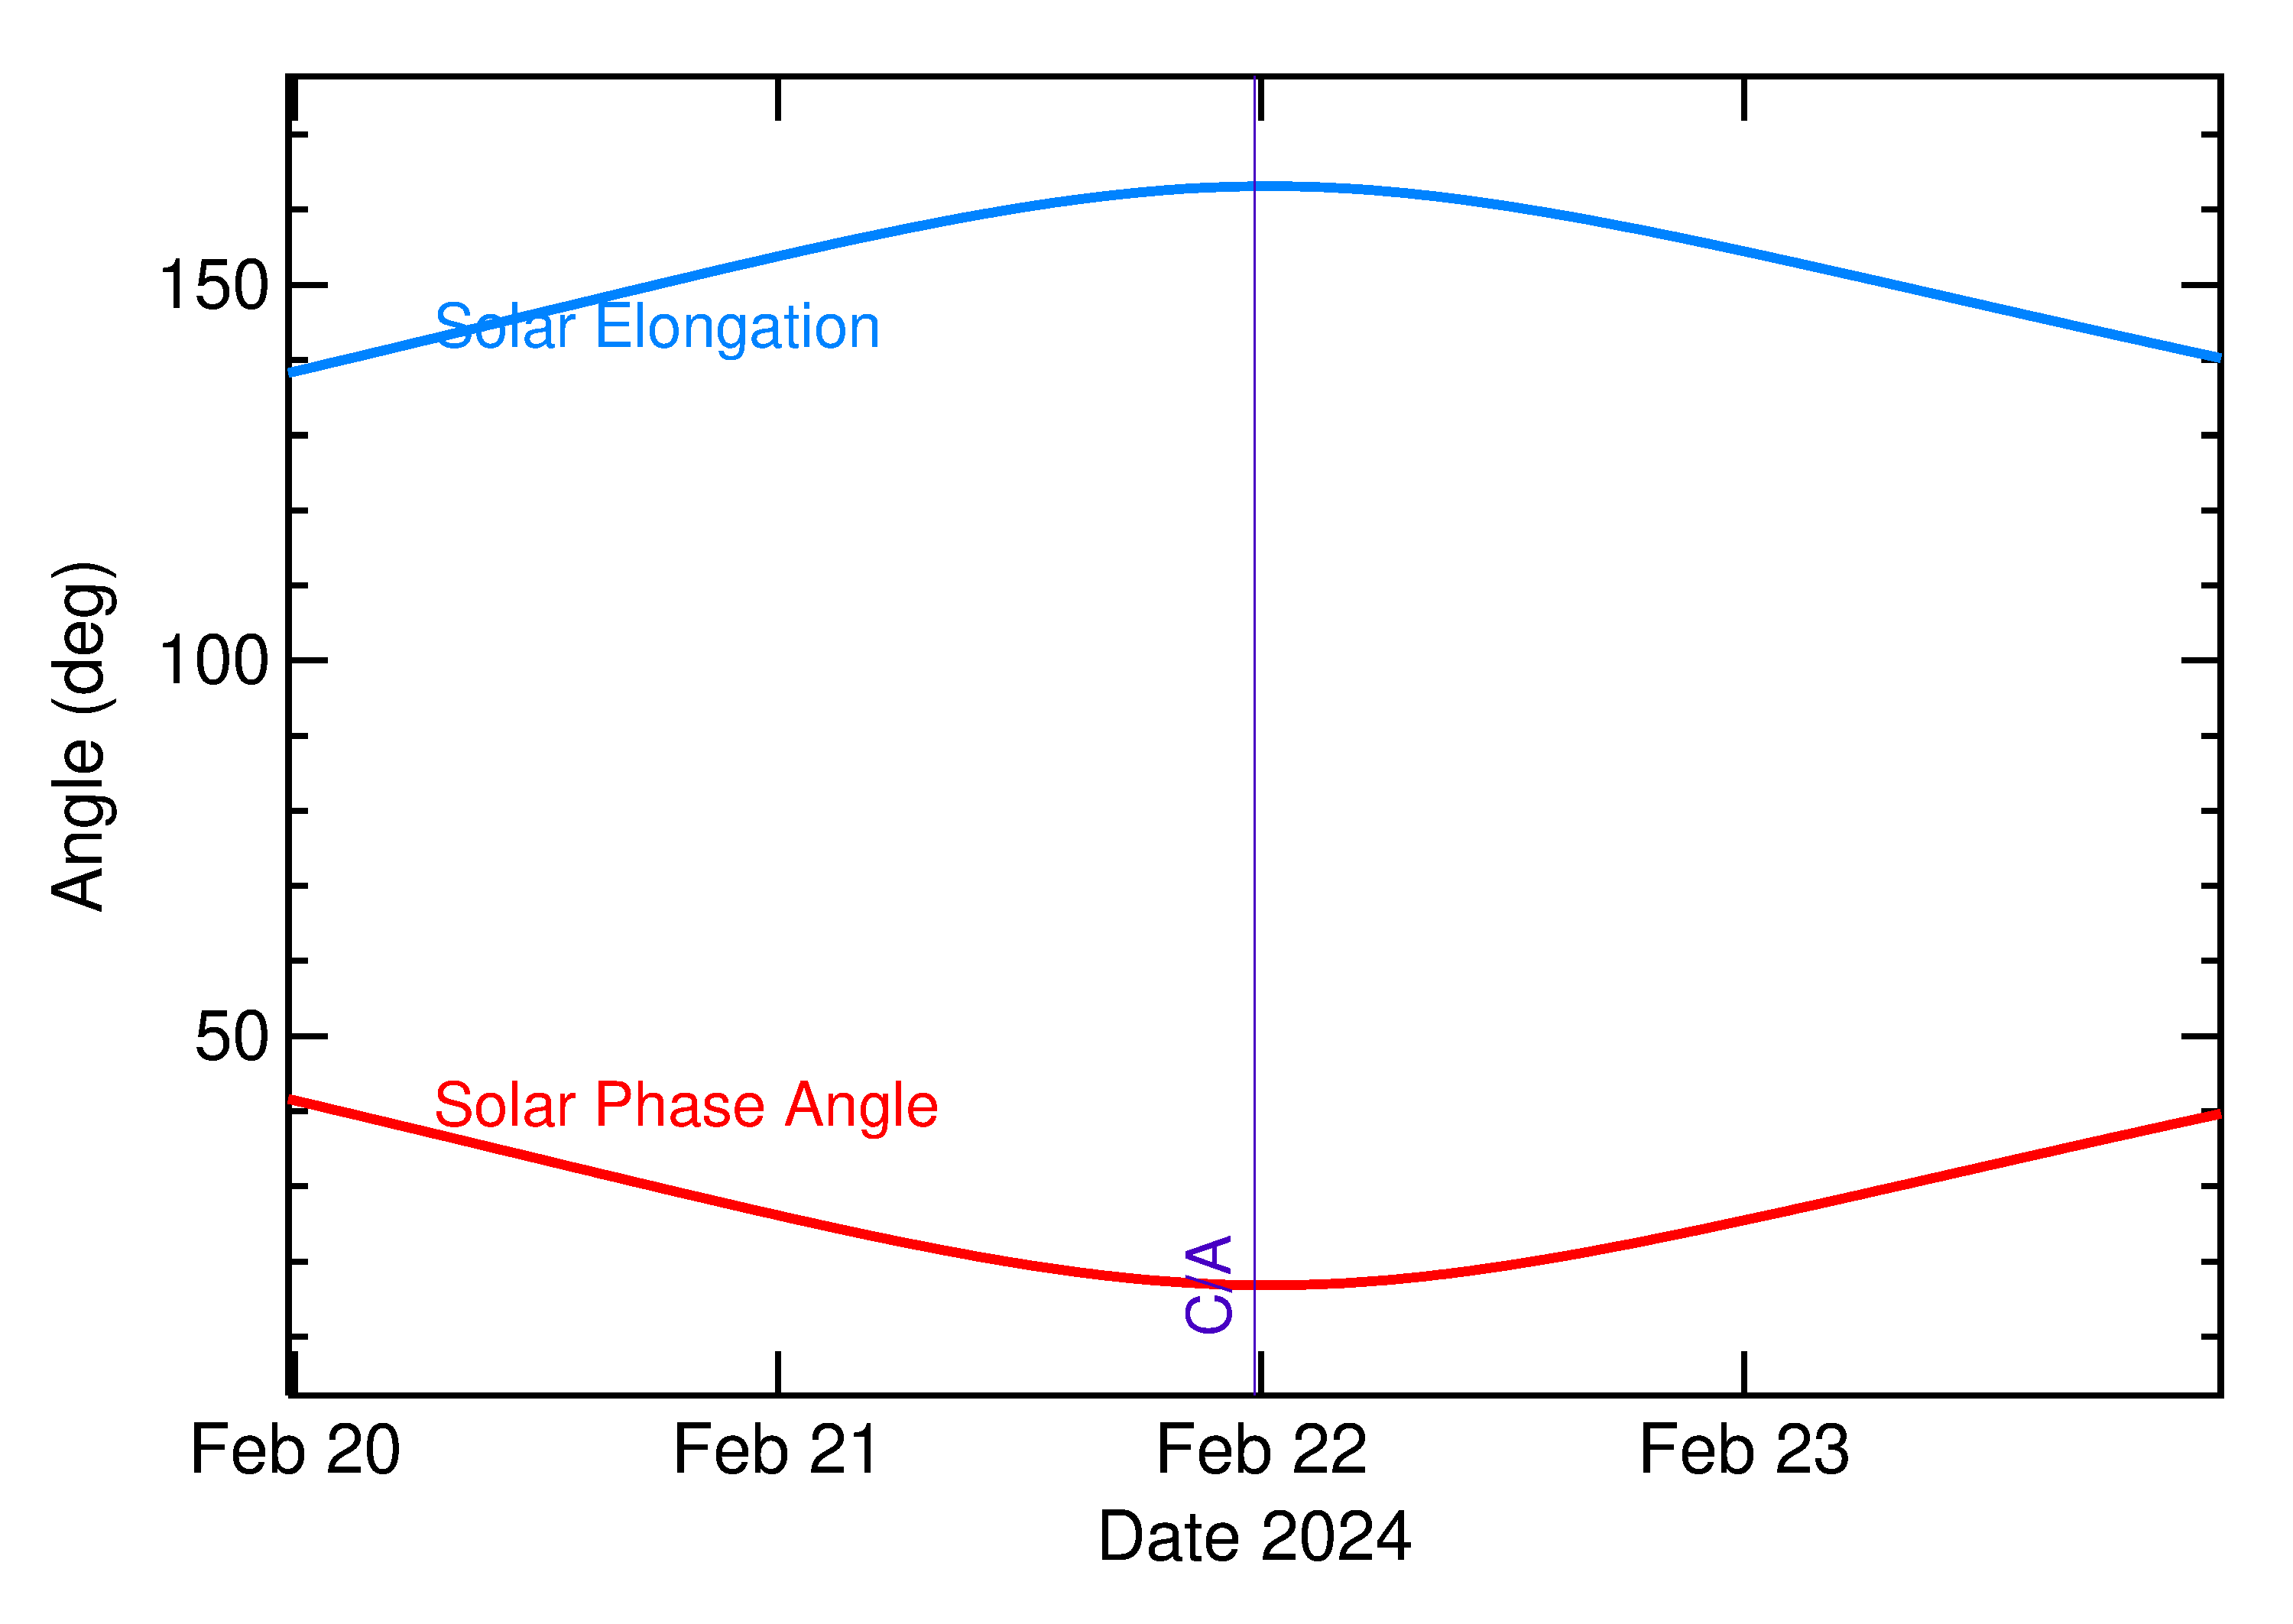 Solar Elongation and Solar Phase Angle of 2024 JV8 in the days around closest approach